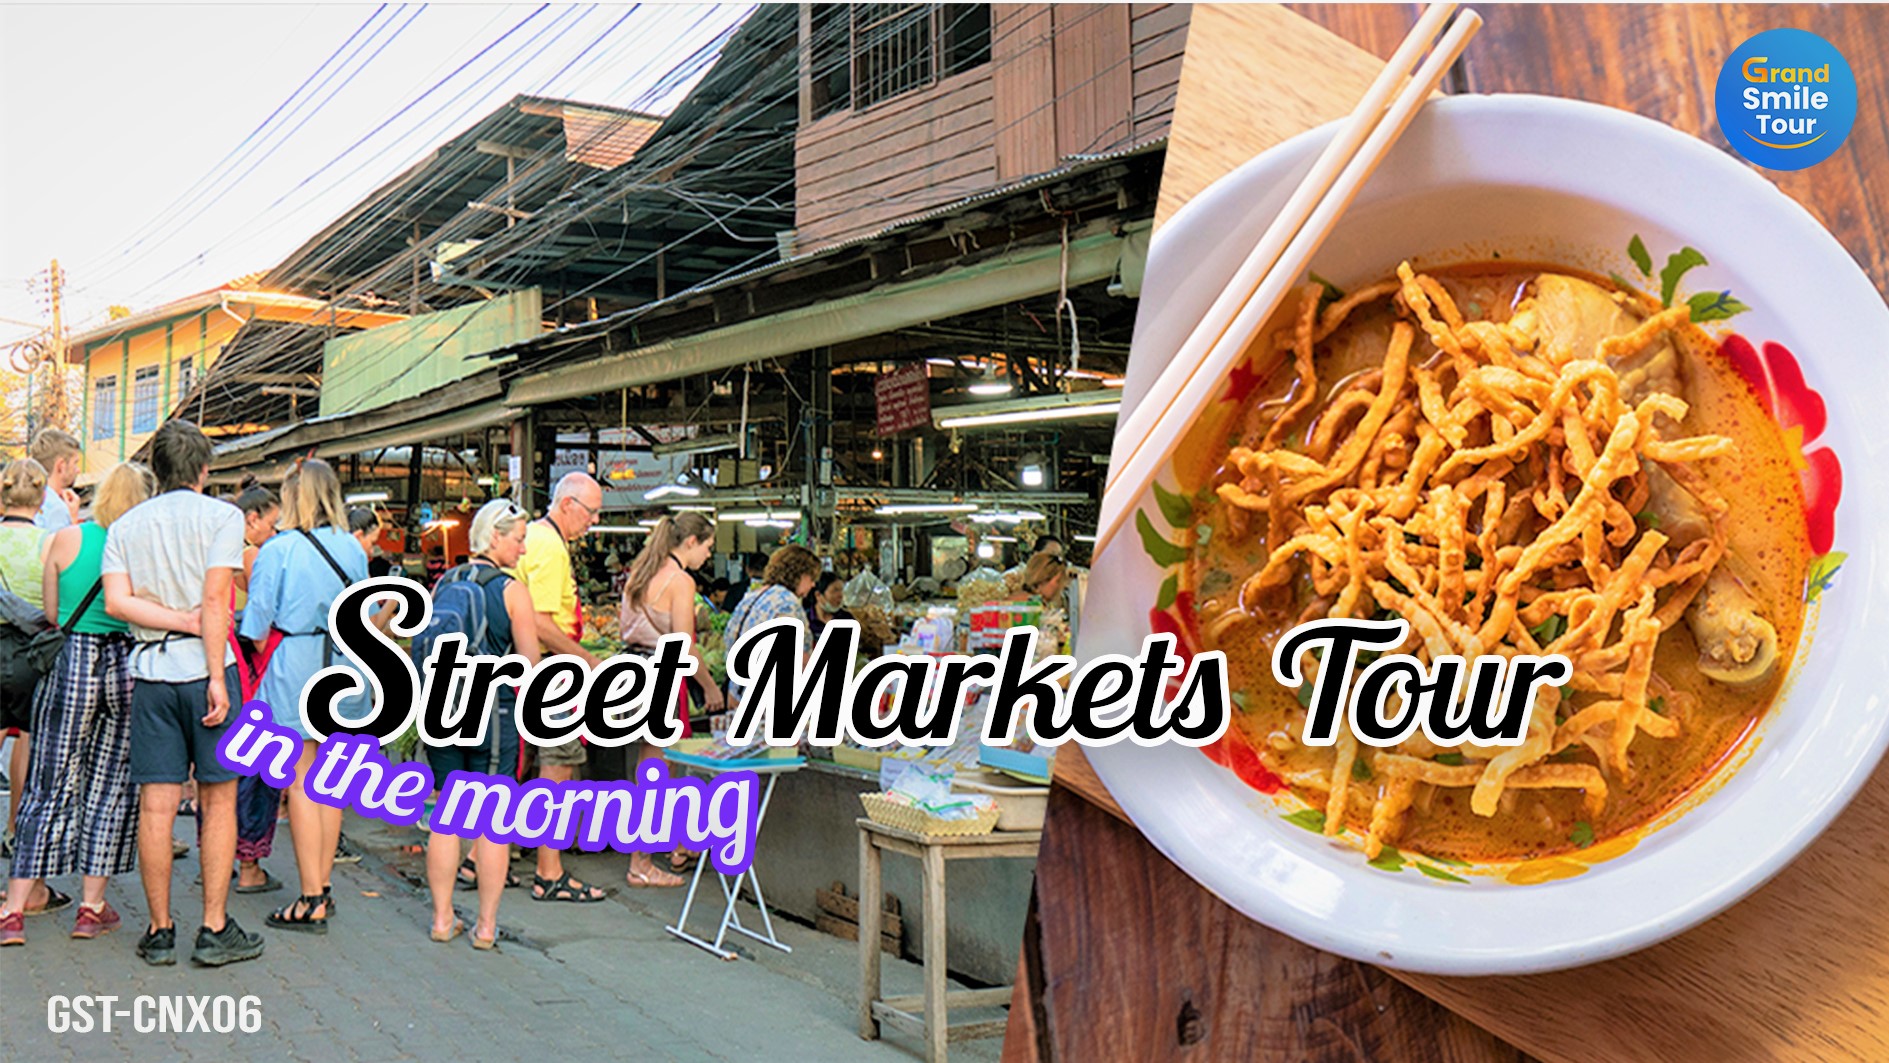 GST-CNX06 Street Market Tour in the morning